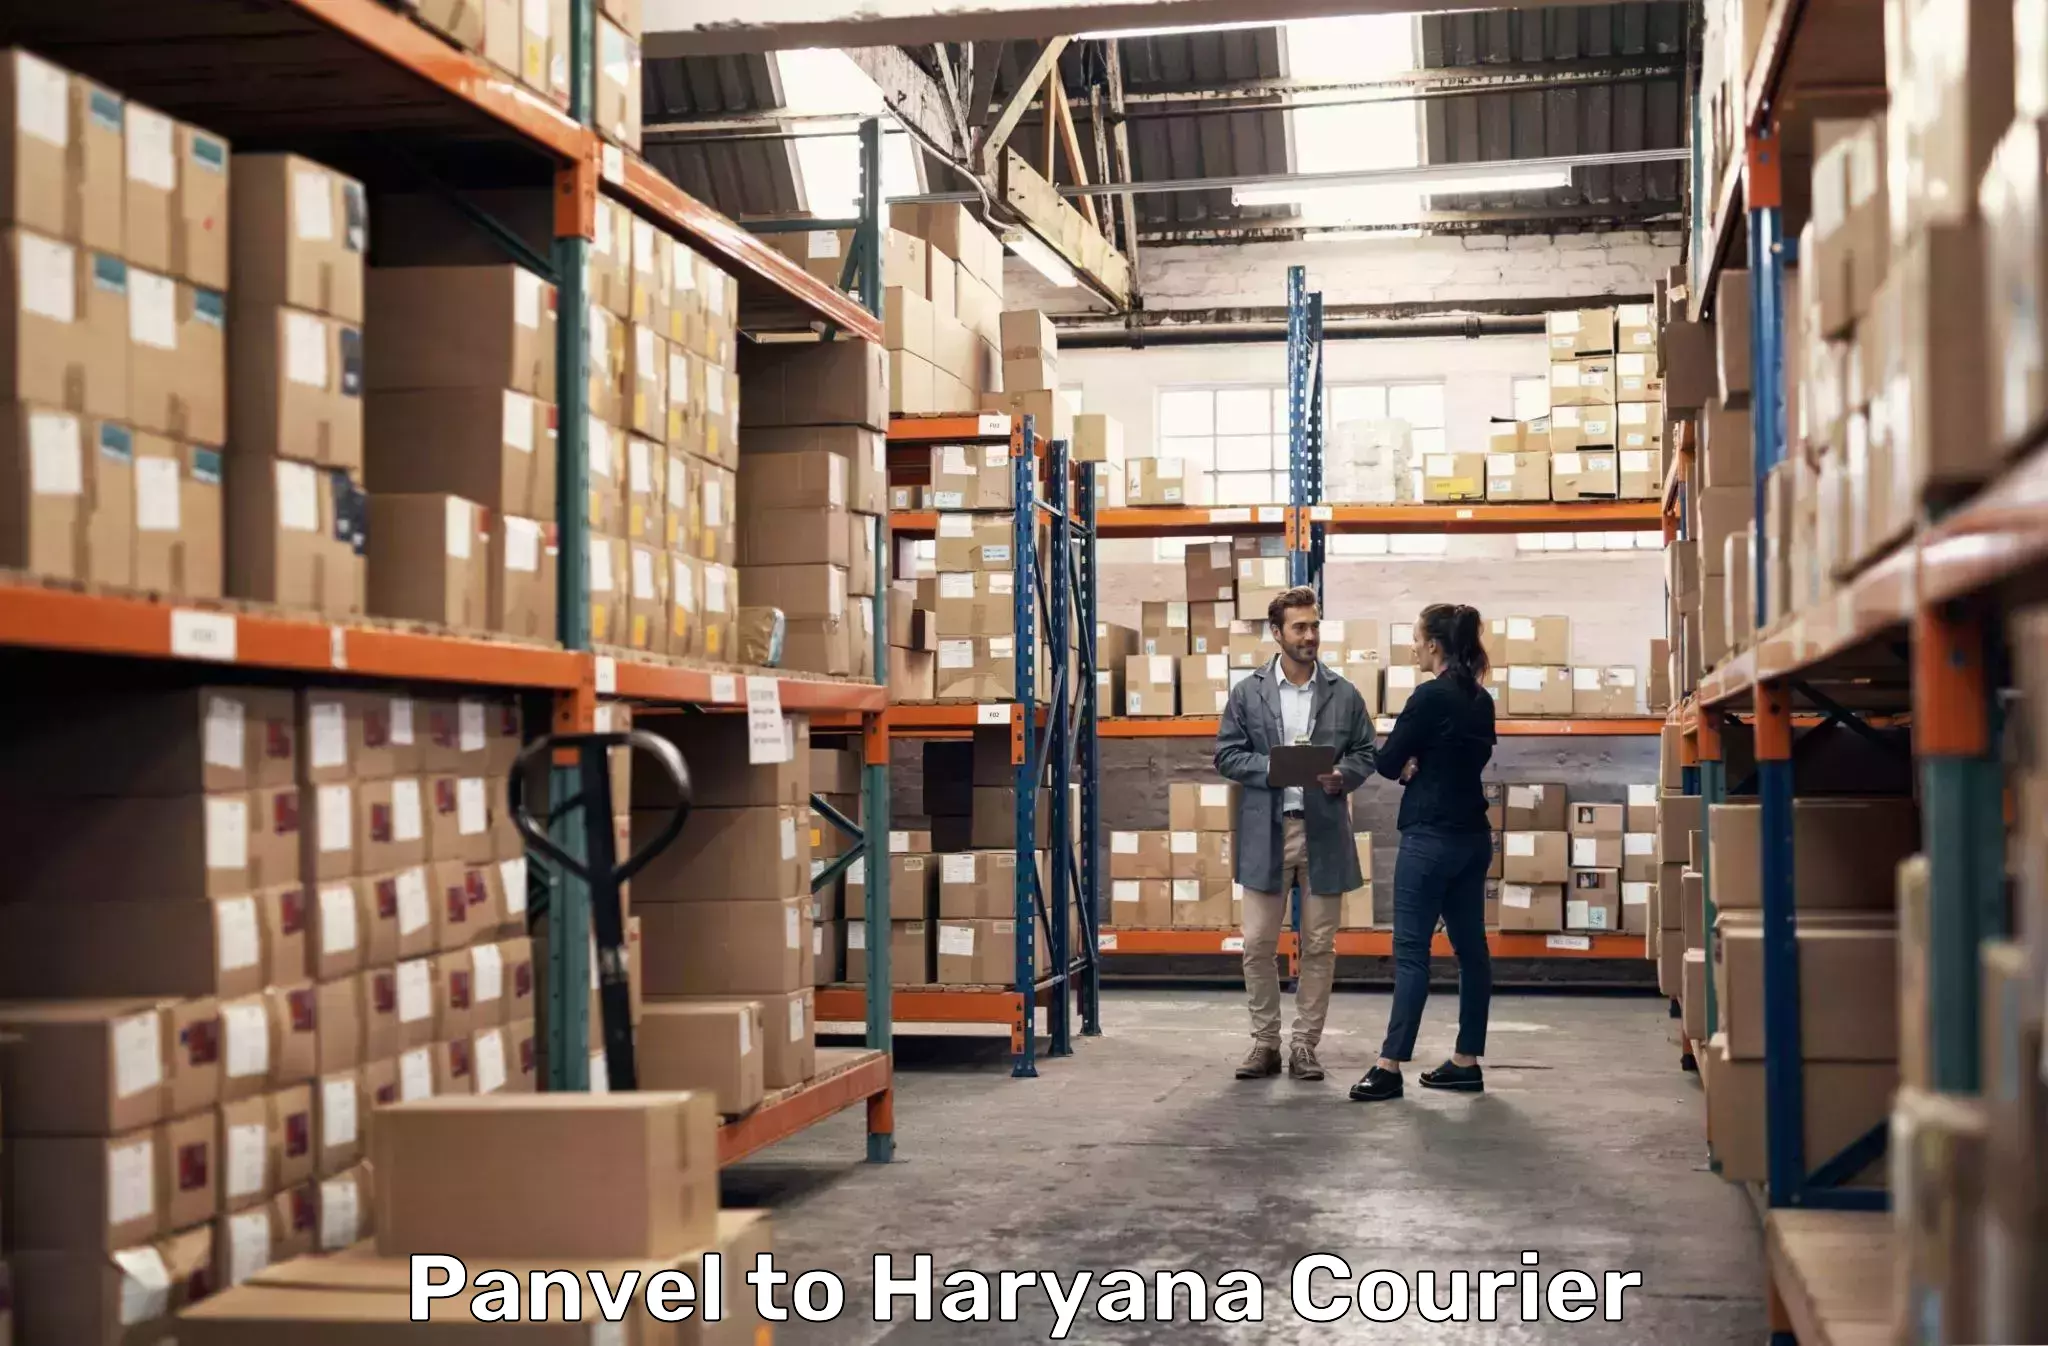 Small business couriers Panvel to Gurgaon